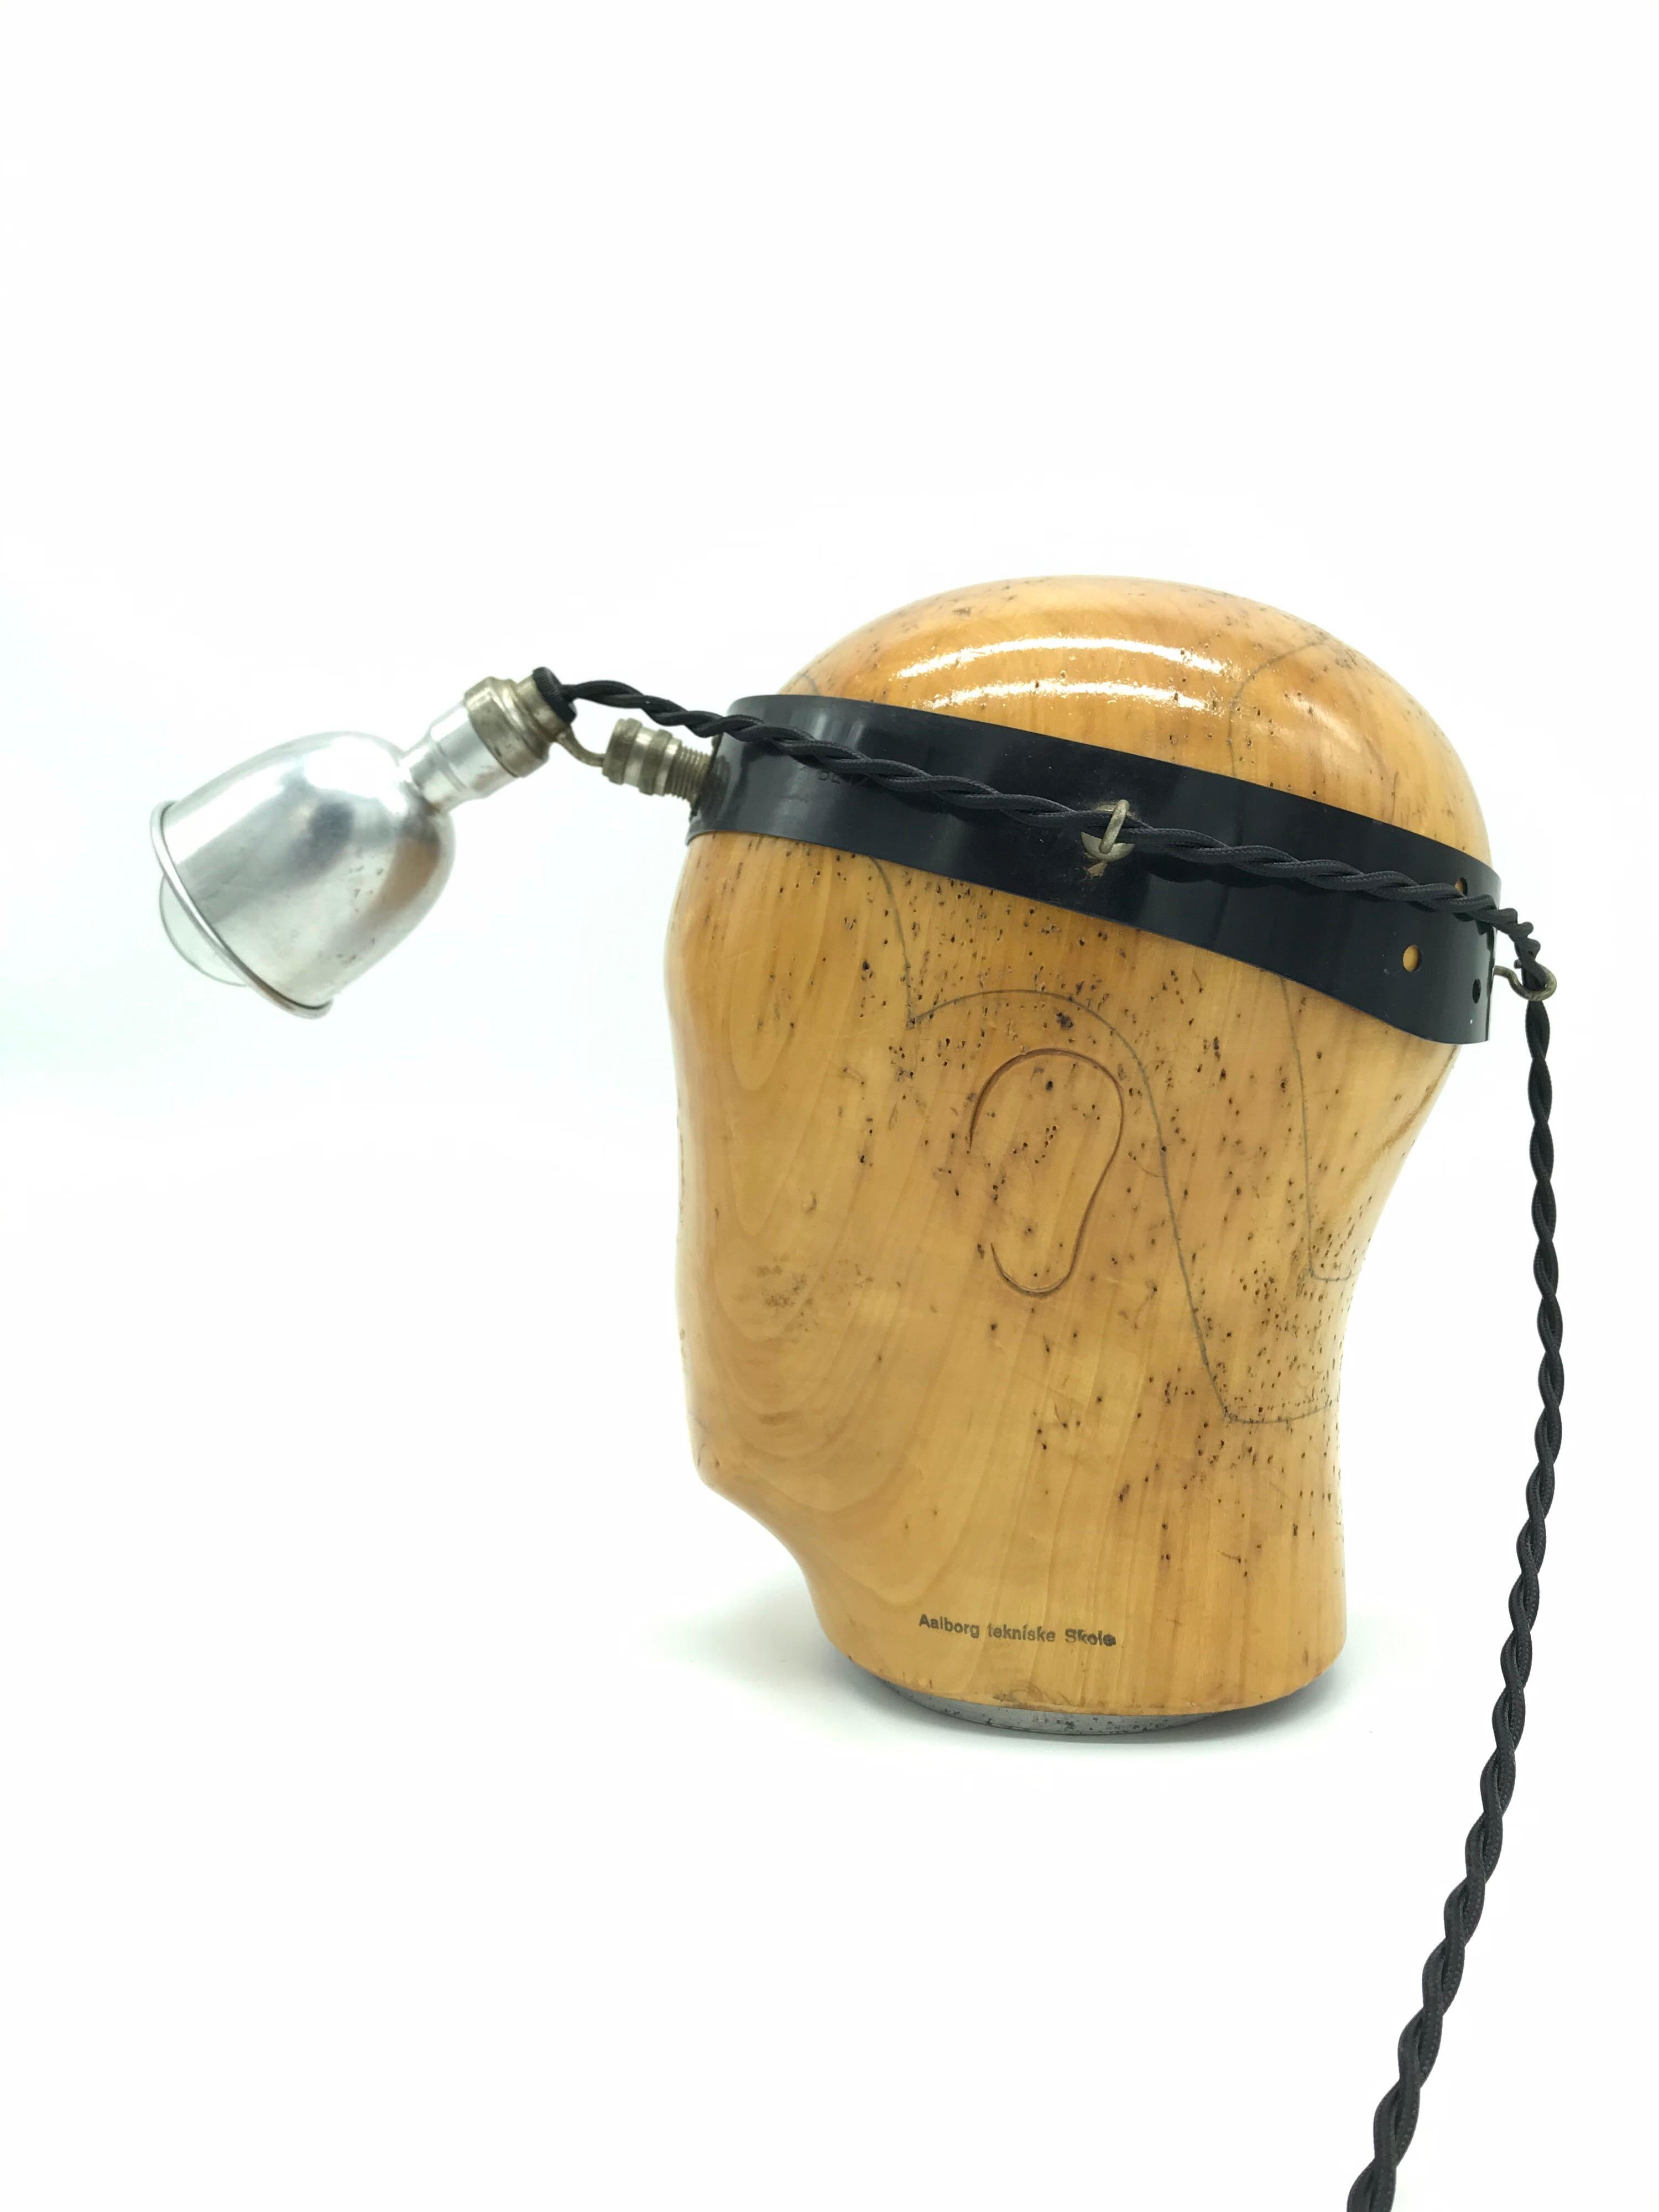 Vintage medical head stand table lamp.
Made from a vintage wooden hat or wig stand and mounted with an antique medical inspection lamp
A cool table lamp like no other
The medical lamp has a small 6cm aluminum pressed shade and with a carbon filament